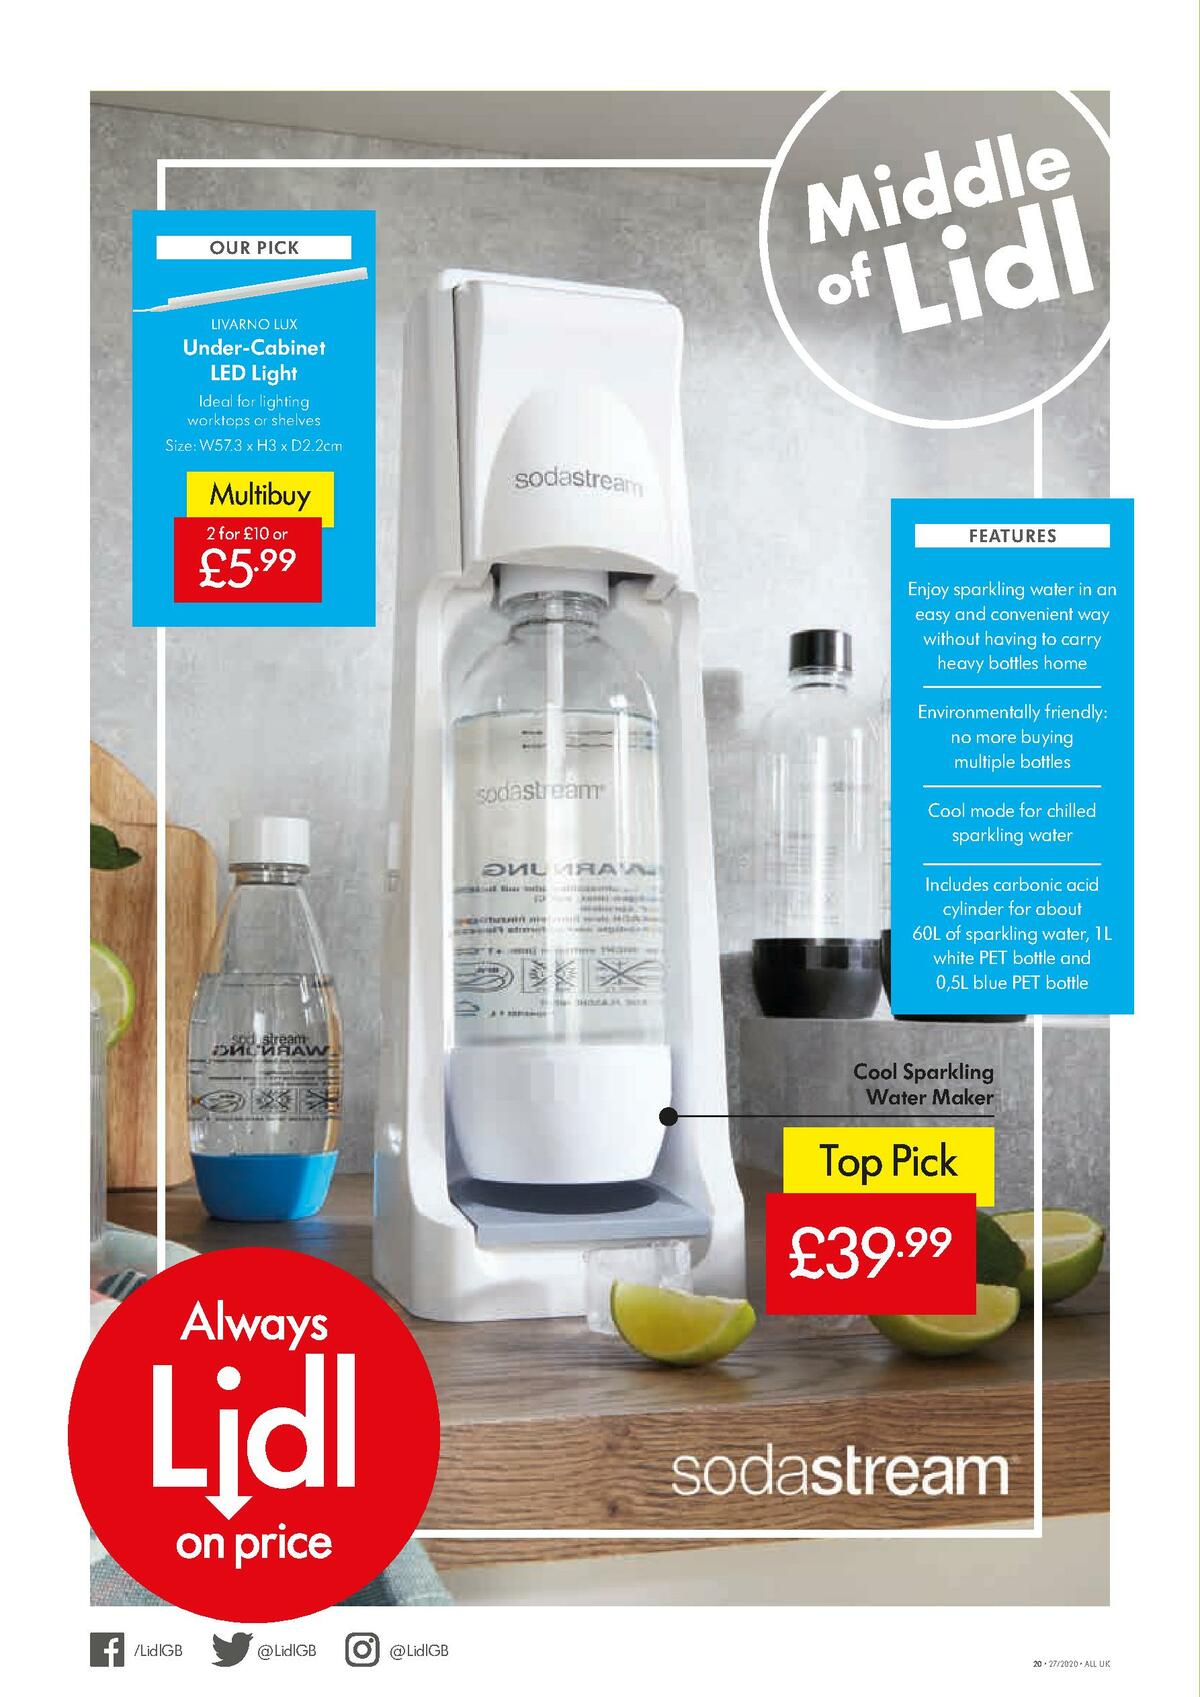 LIDL Offers from 2 July